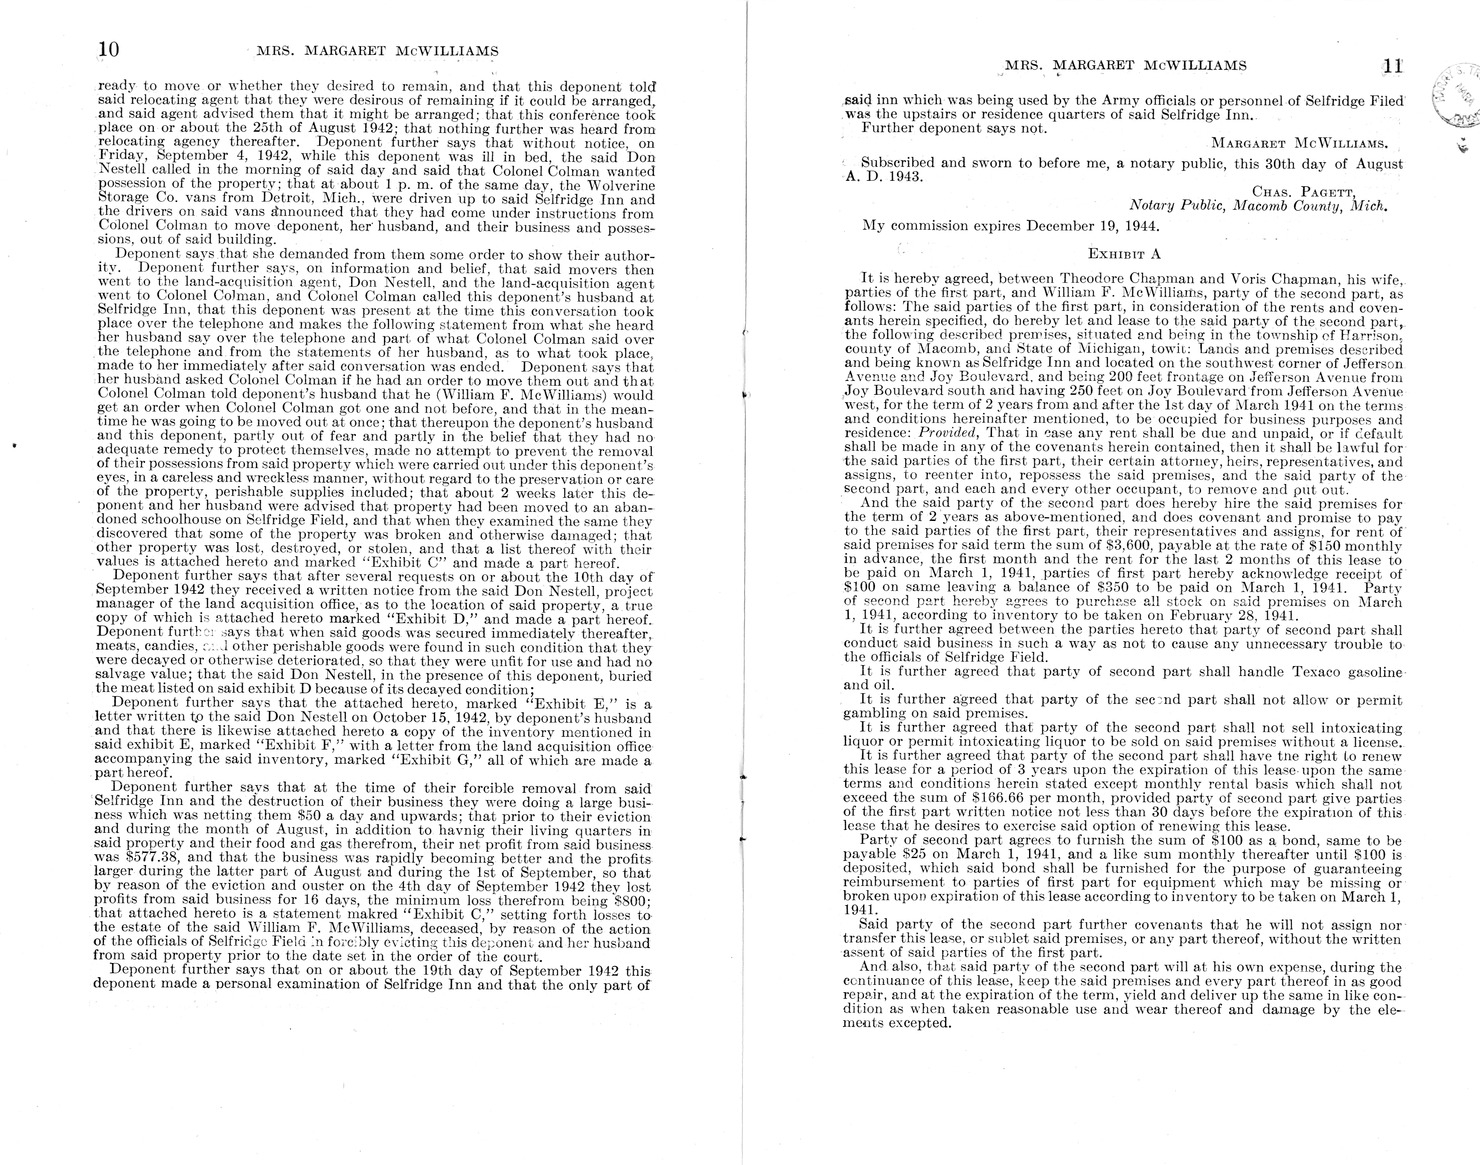 Memorandum from Frederick J. Bailey to M. C. Latta, H. R. 1090, For the Relief of Mrs. Margaret McWilliams, with Attachments